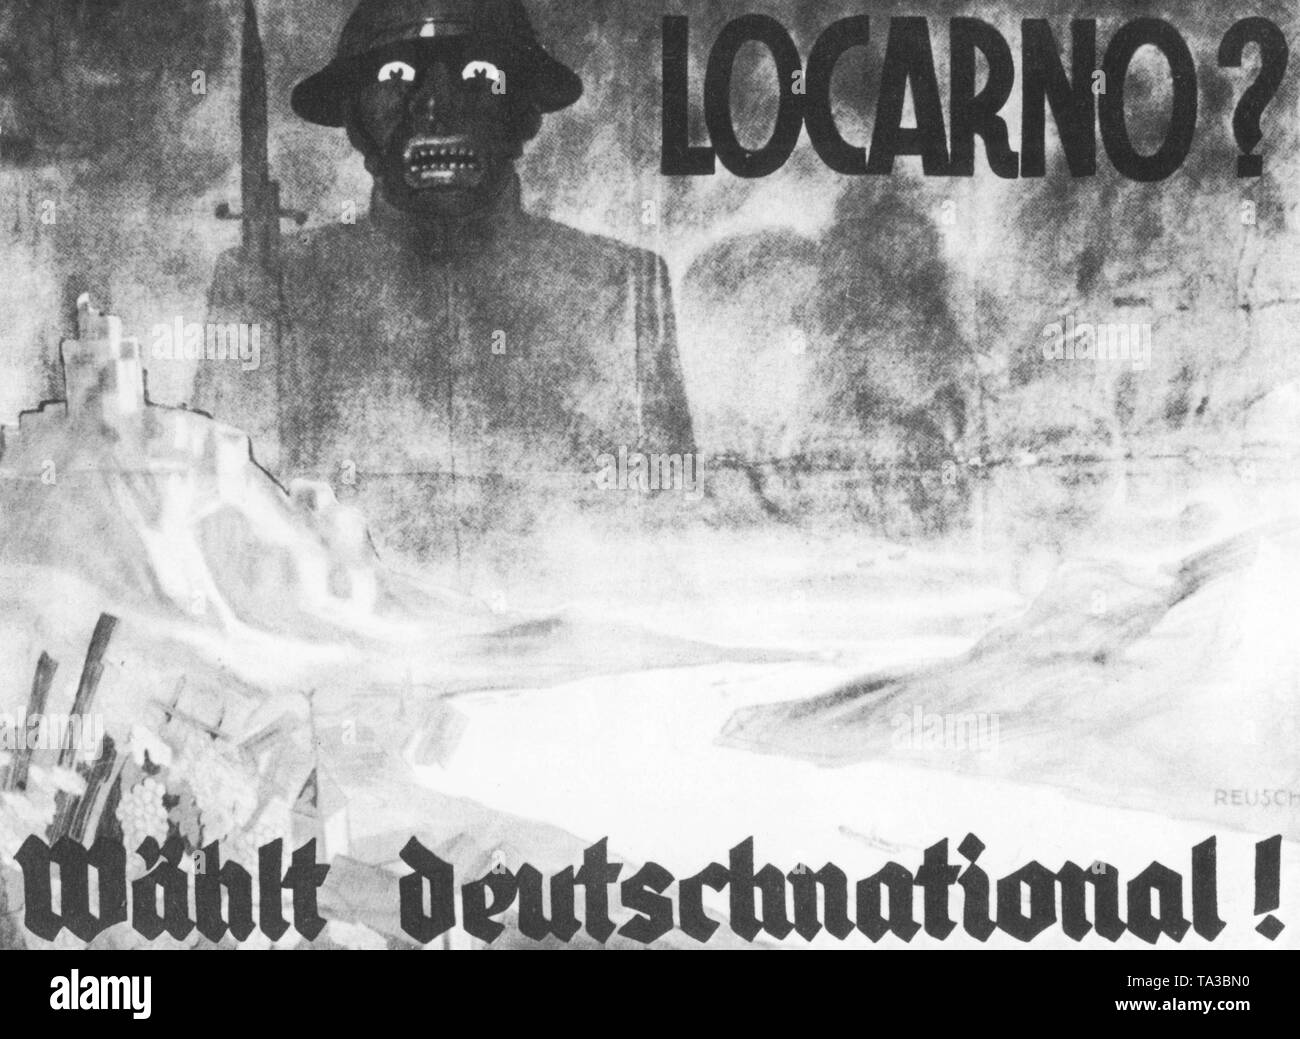 The election campaign of the DNVP (German National People's Party) for the Reichstag election in 1928, set the mood against the Treaty of Locarno, which envisaged a foreign-policy rapprochement between Germany and France. The picture shows a smiling black French soldier, who threatens the German Rhine, its castles and vineyards with a fixed bayonet. Stock Photo